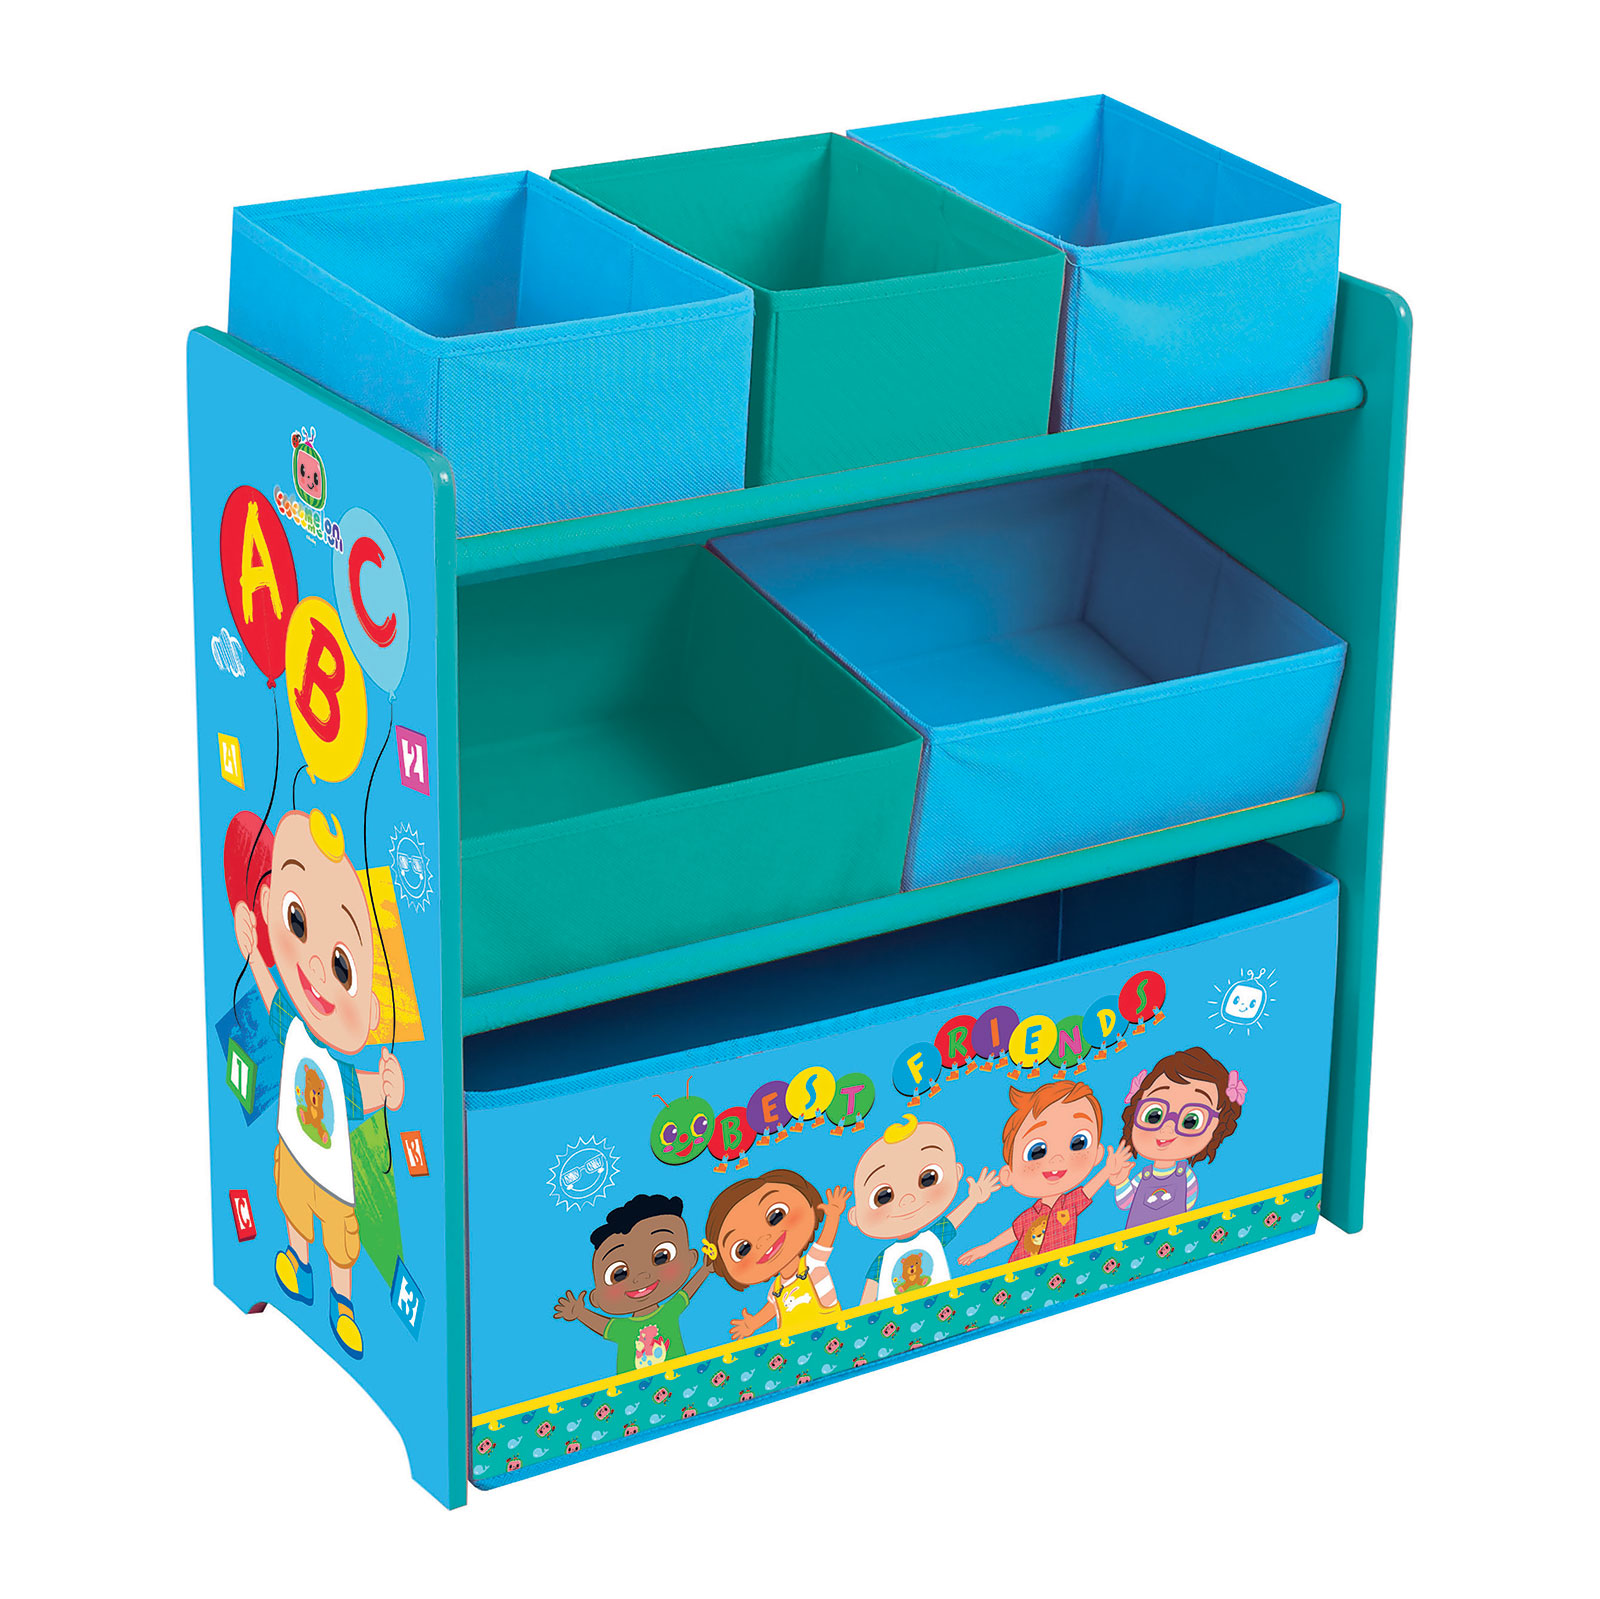 Cocomelon Wooden Toy Organiser with 6 Storage Bins  – Blue